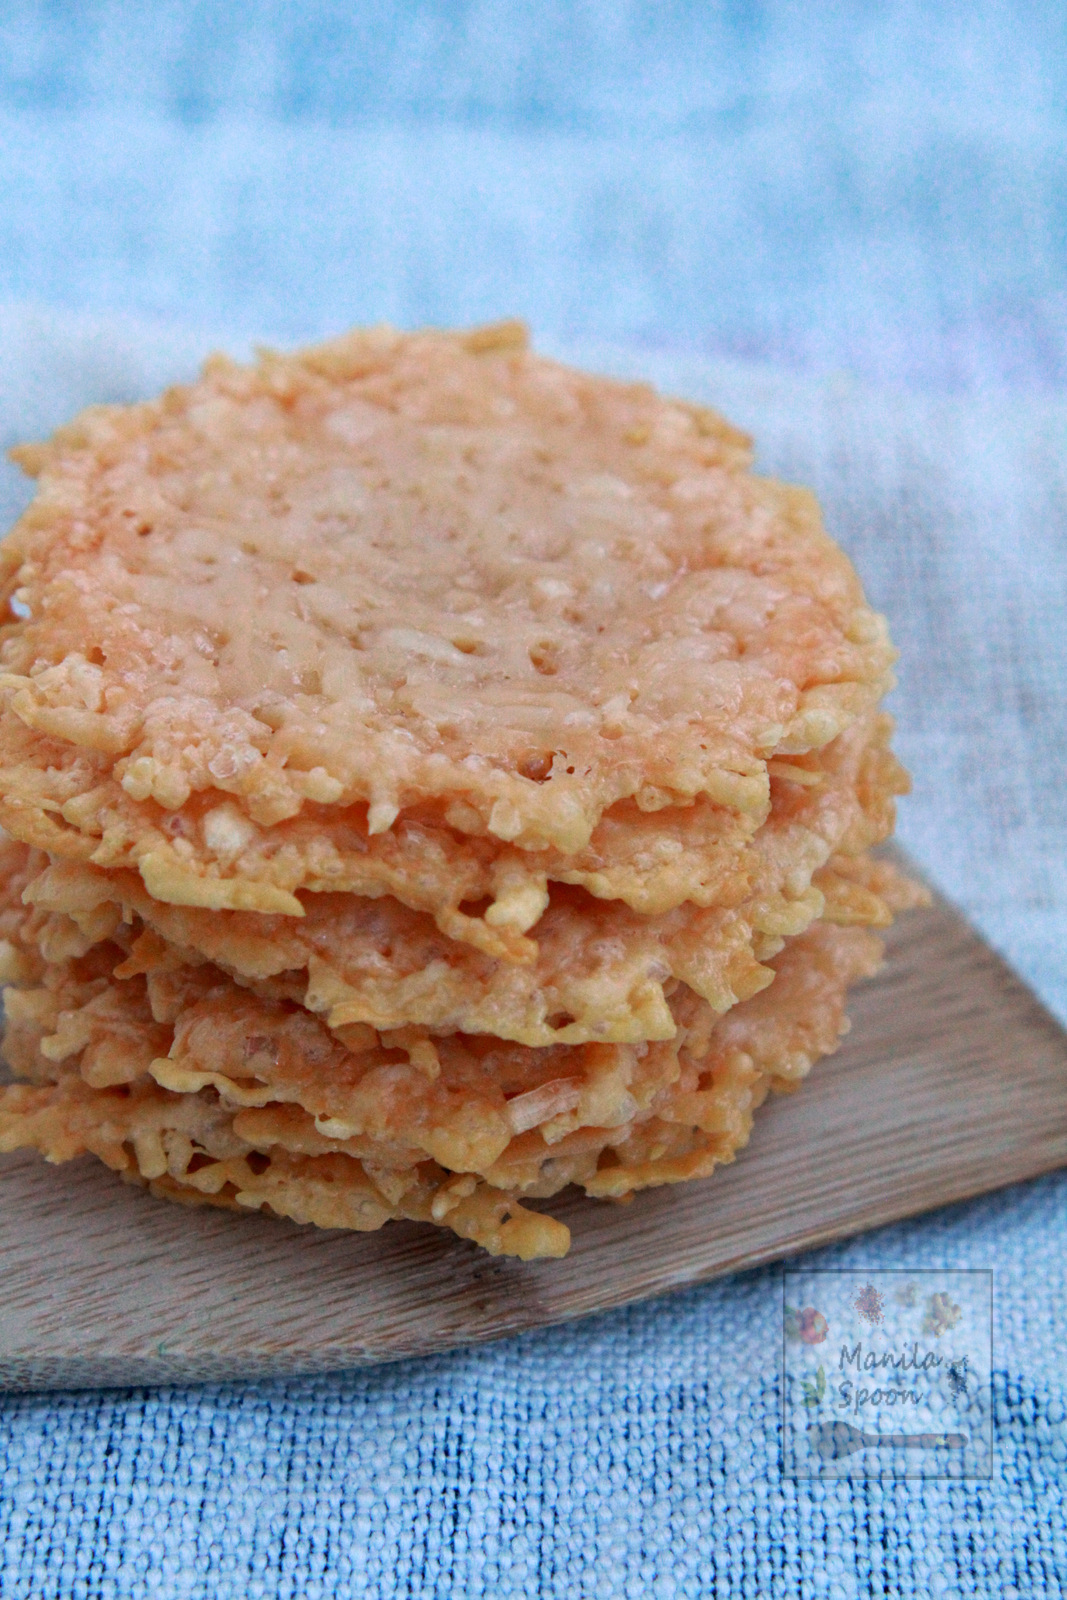  With only 1 ingredient and just a few minutes to make these Parmesan Crisps are the perfect low-carb snacks or crunchy topping for soups and salads! Gluten-free!